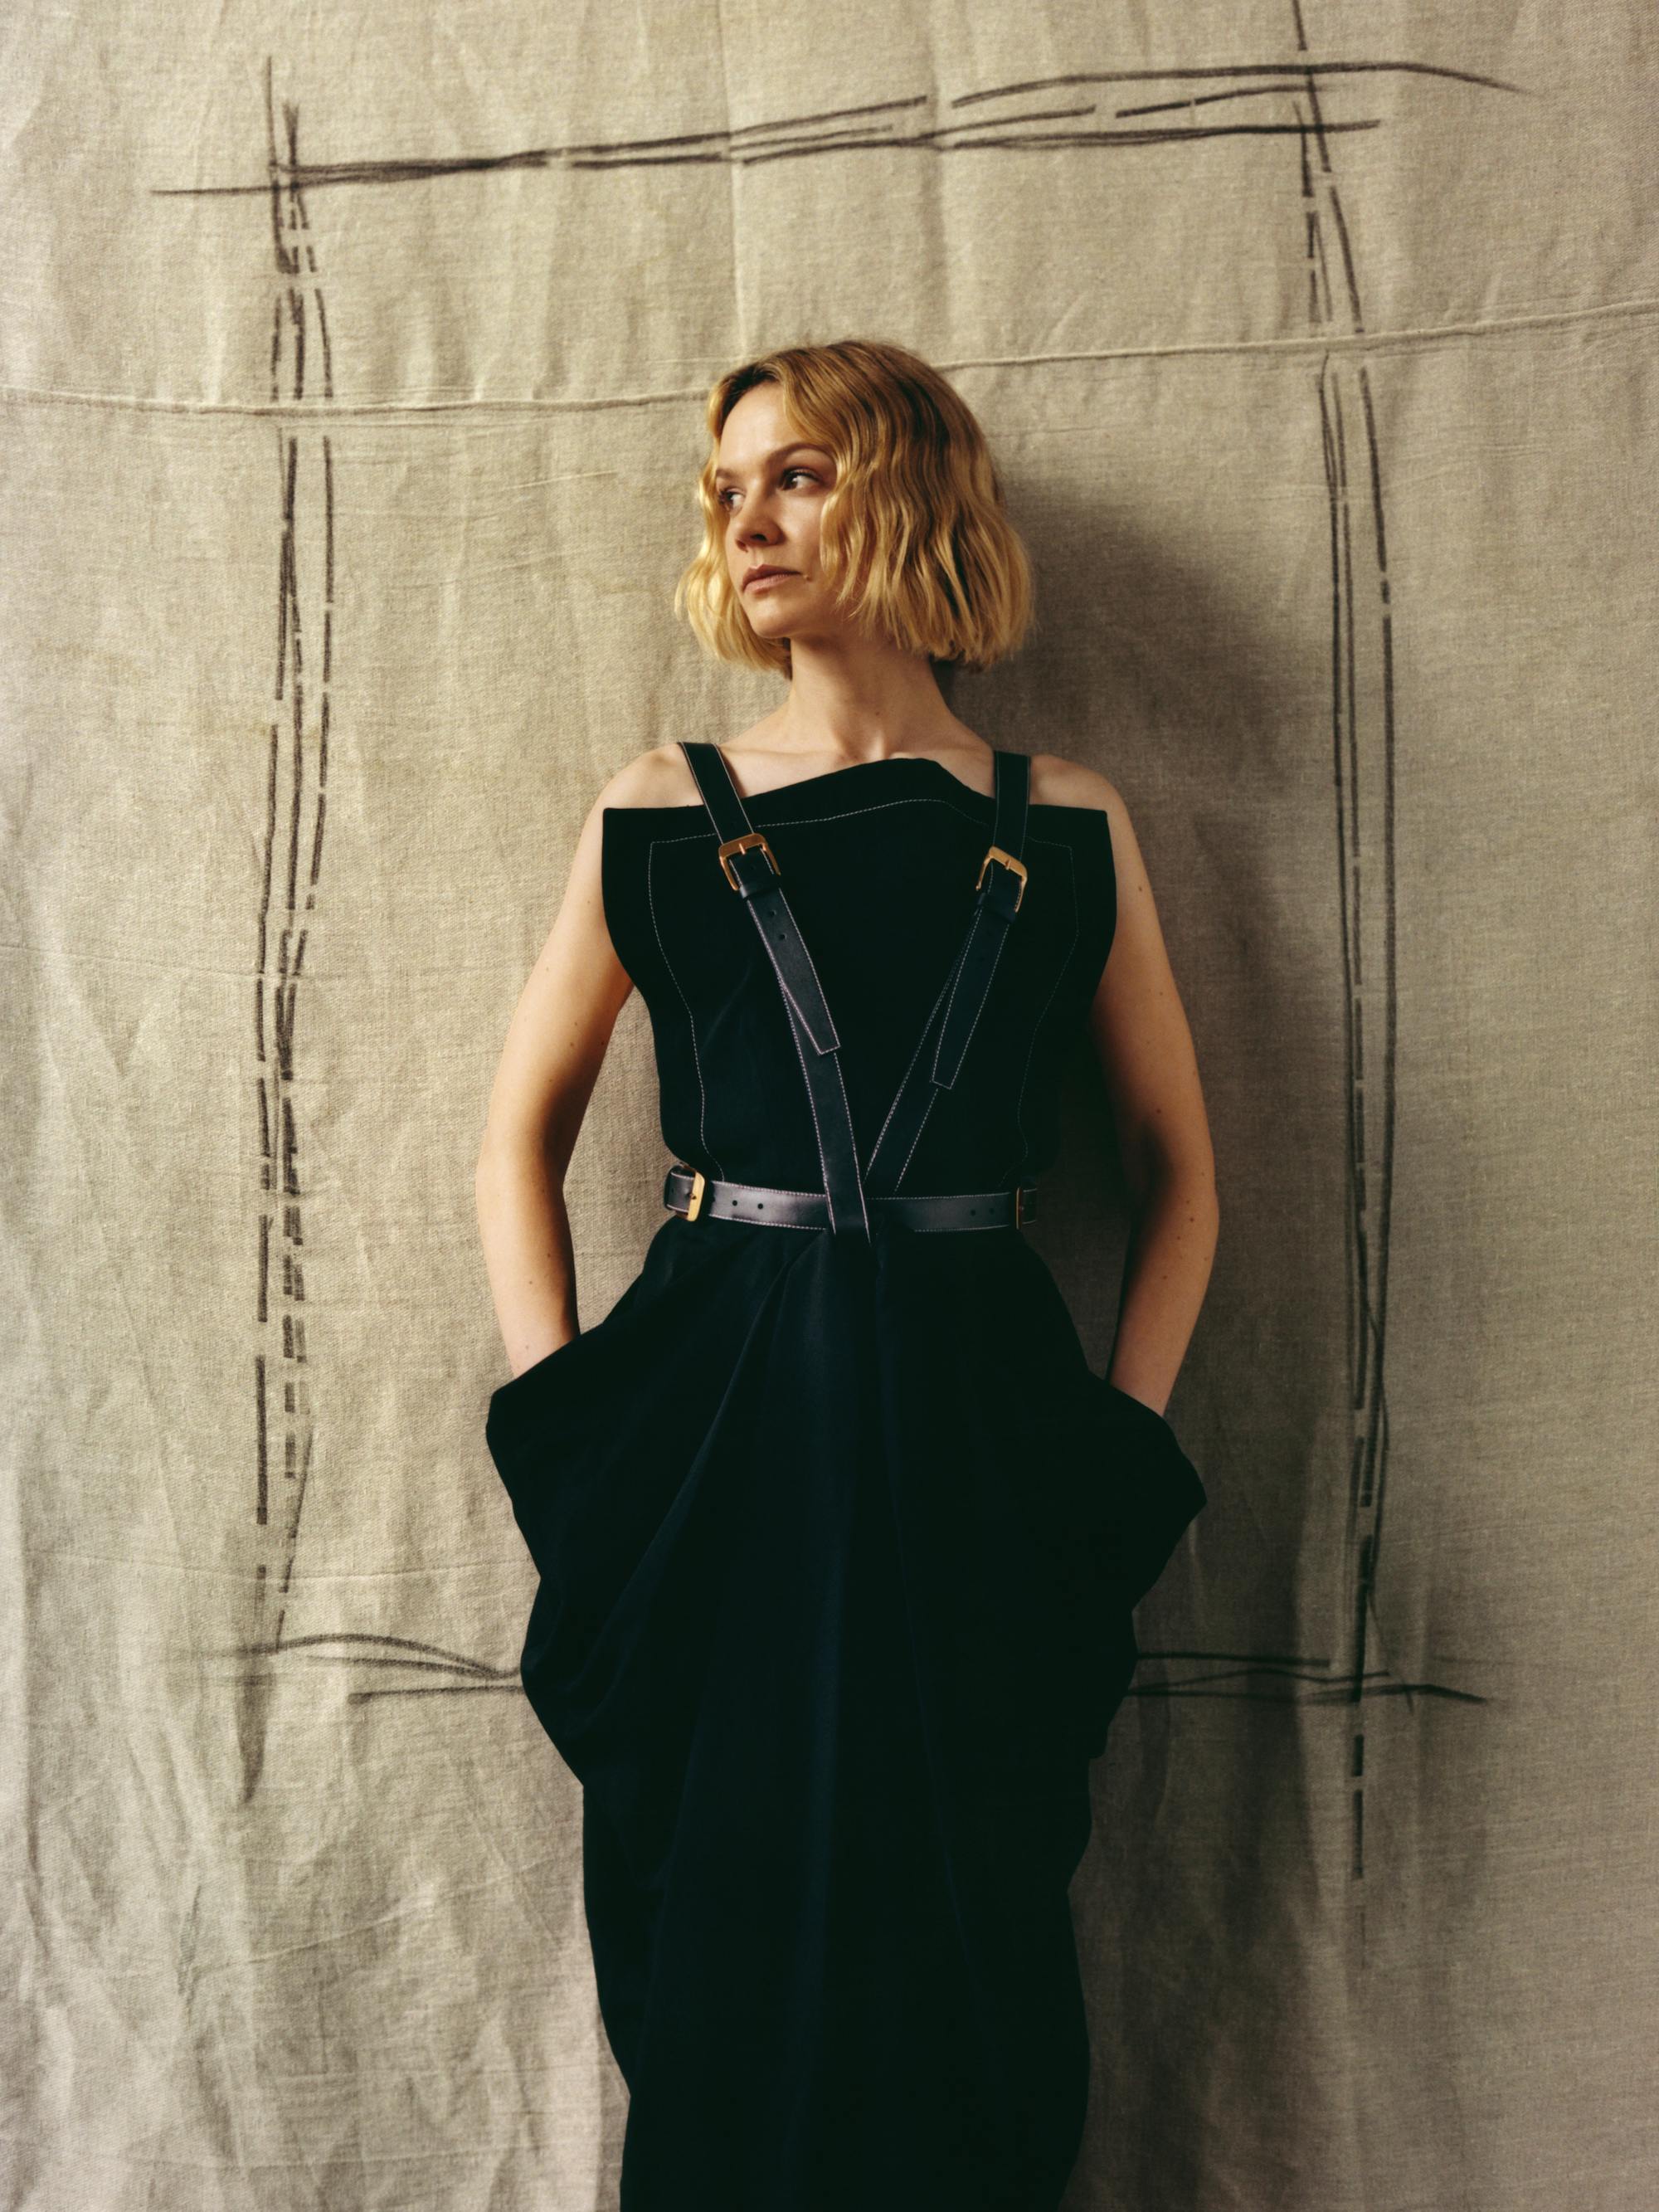 Carey Mulligan wears a black outfit with strappy suspenders.